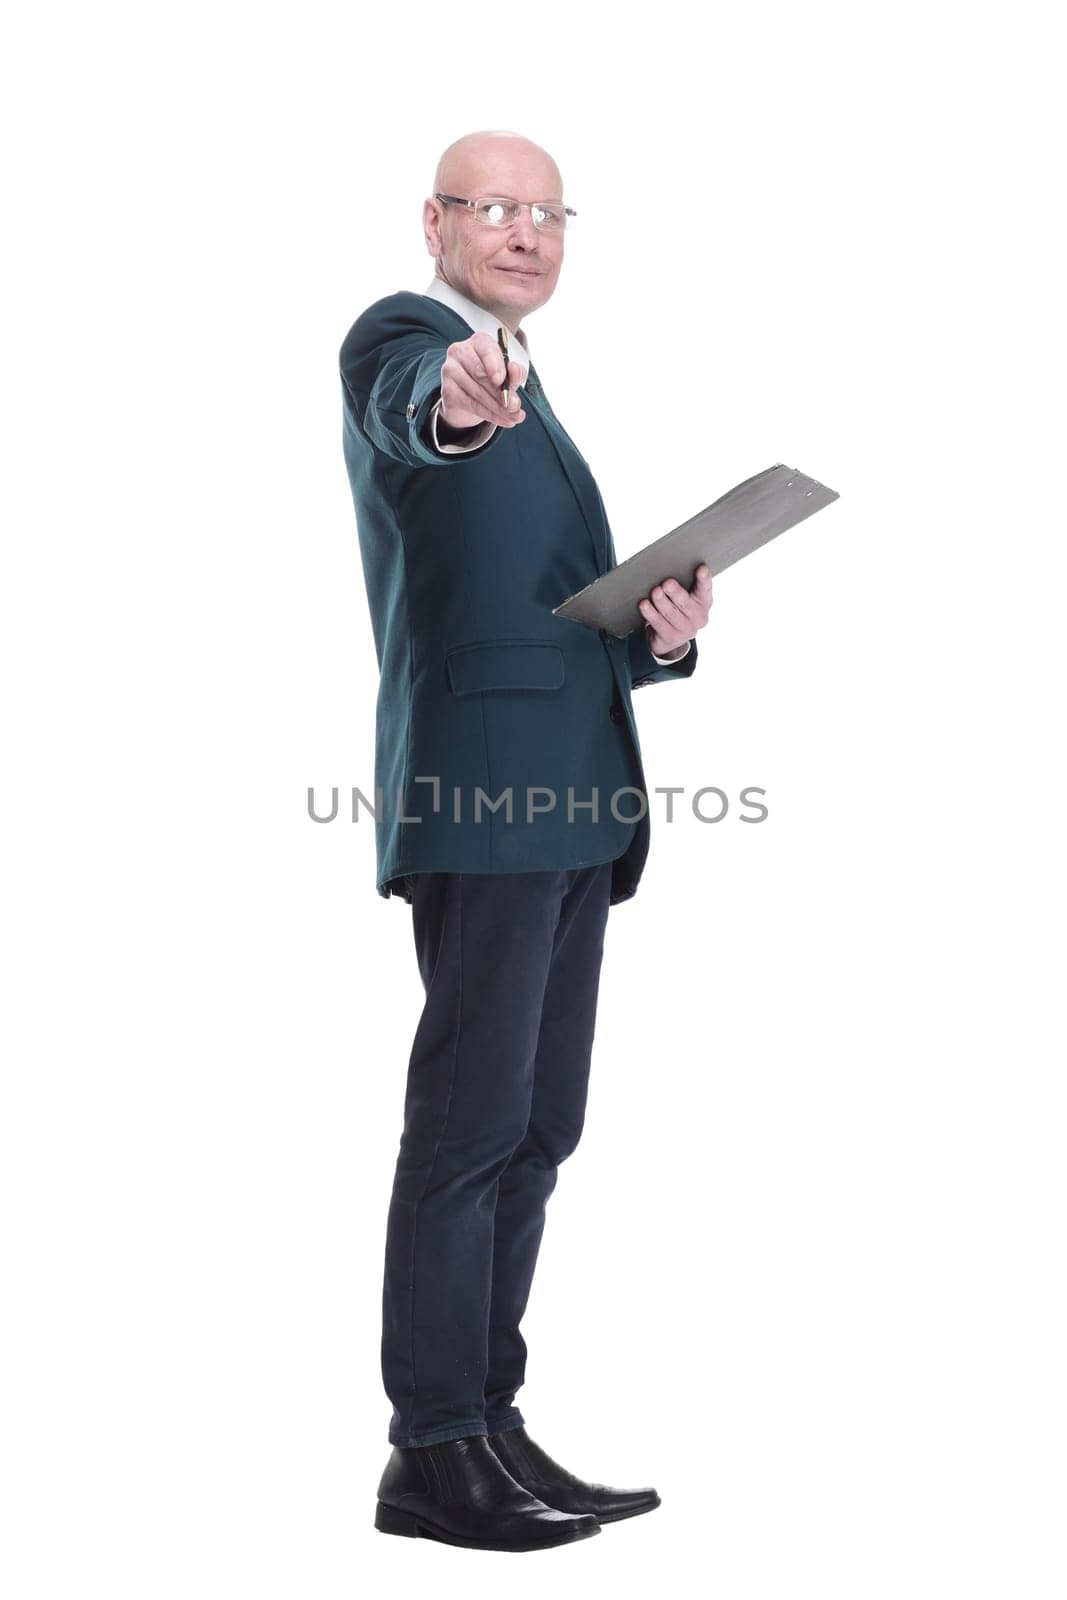 side view. serious business man writing something in the clipboard. isolated on a white background.